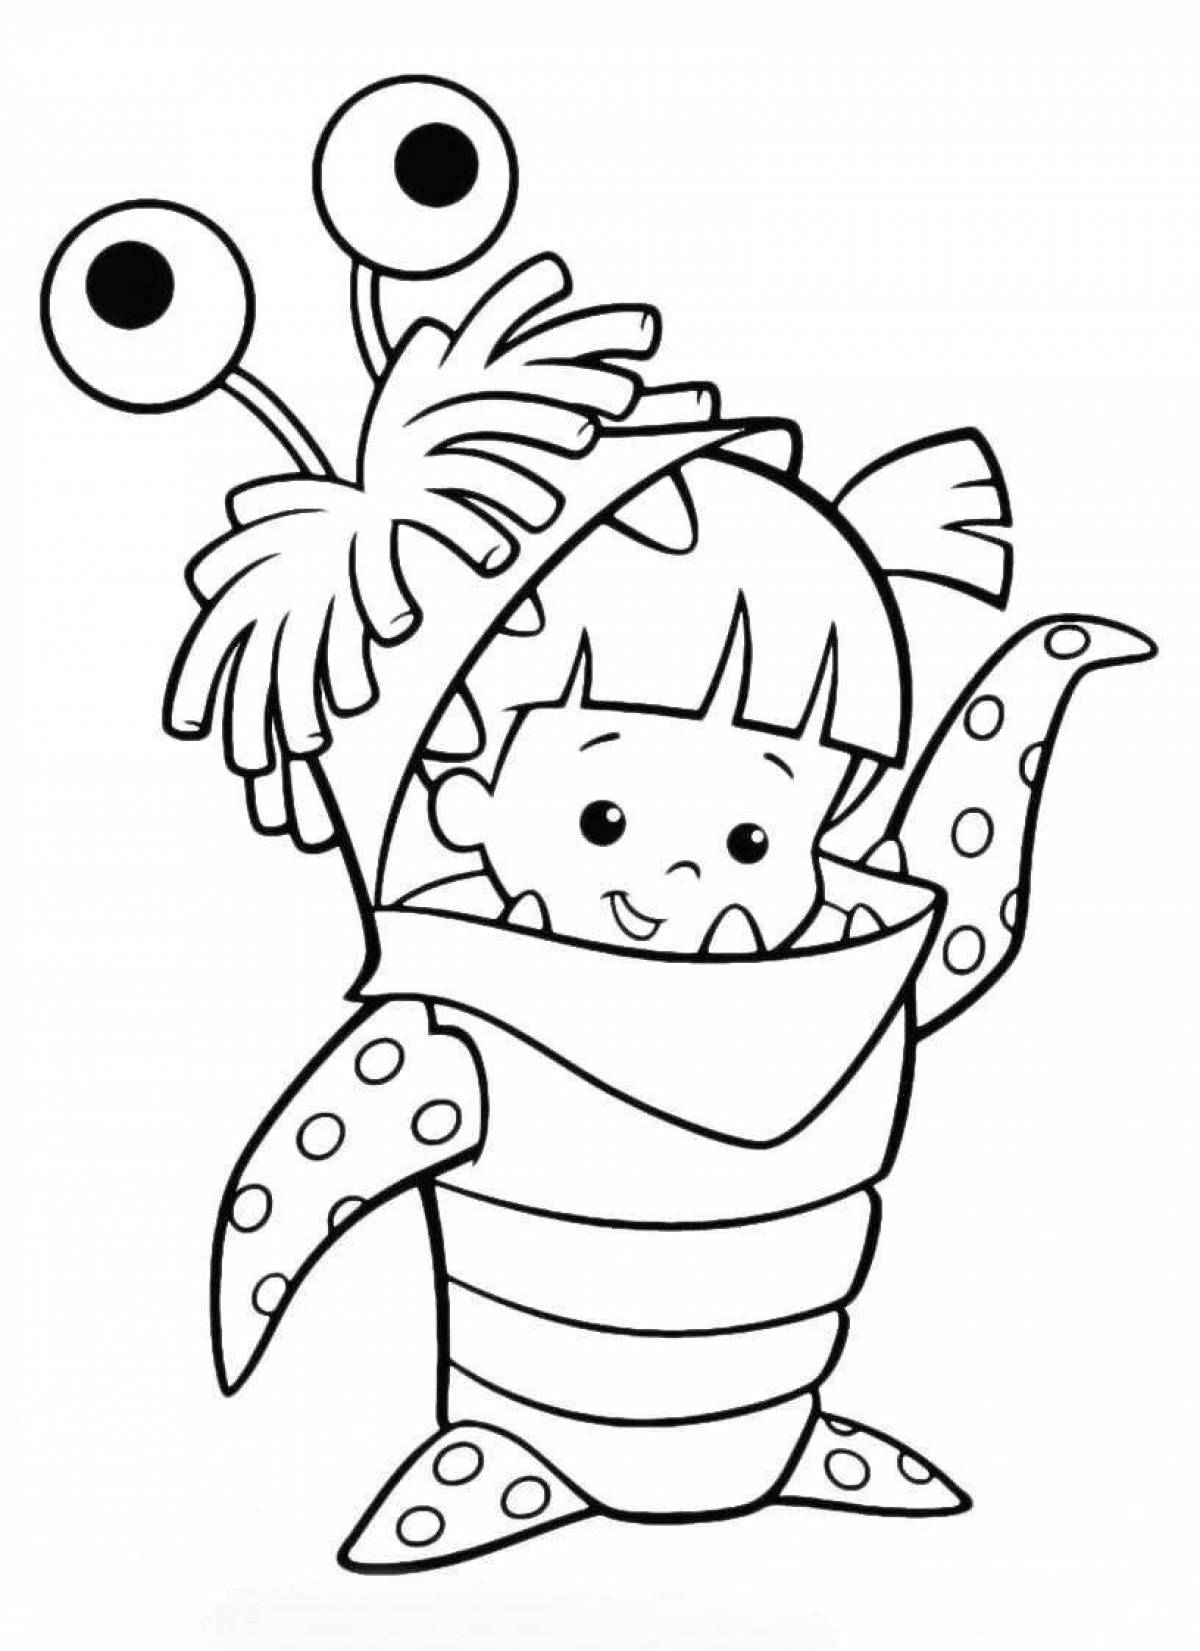 Playable coloring page monsters baby